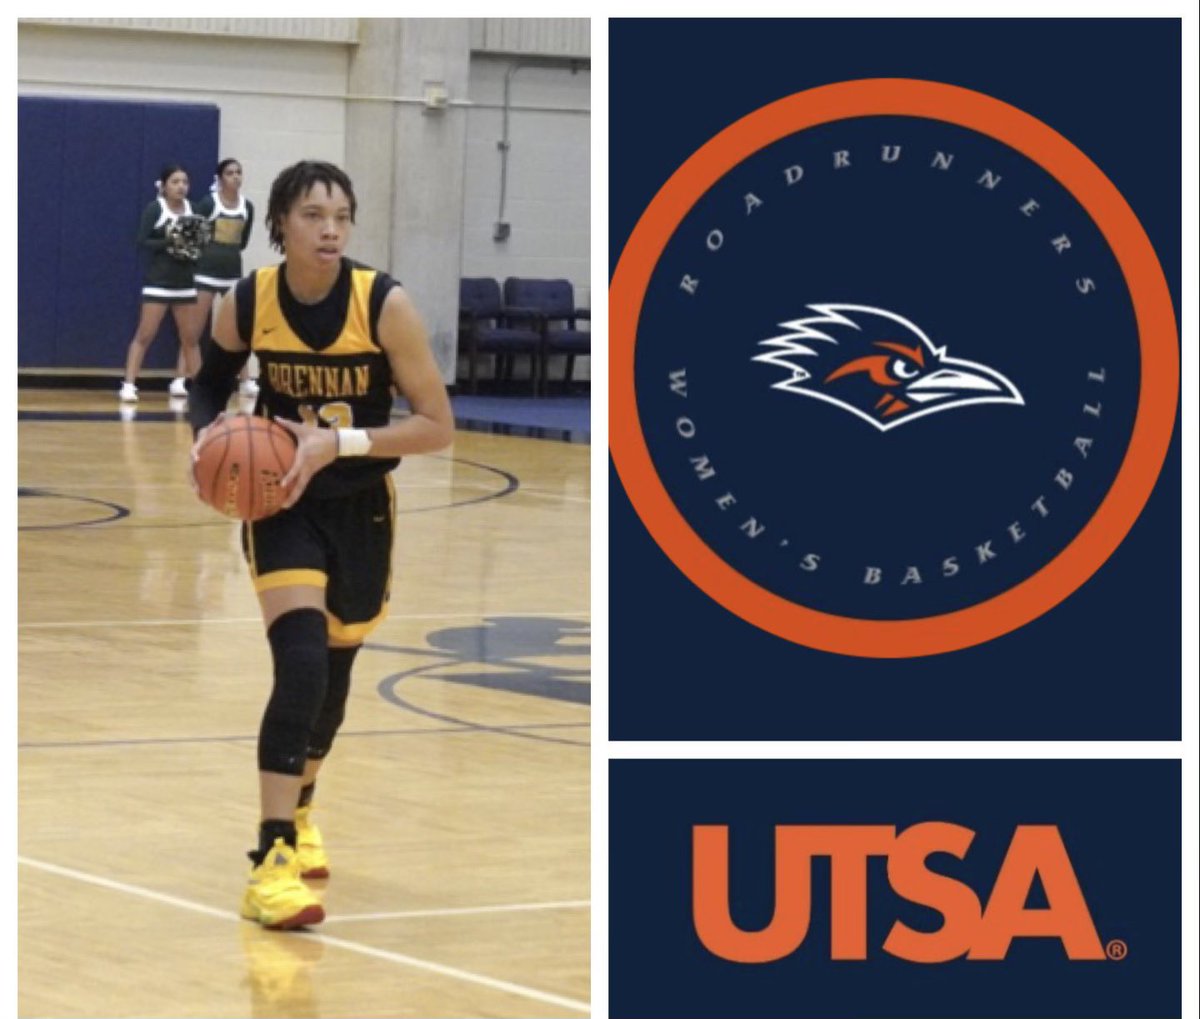 Very blessed to receive an offer from @utsawbb. Thank you @coachkarenA for believing in me.  @bballbrennan @safinestbball